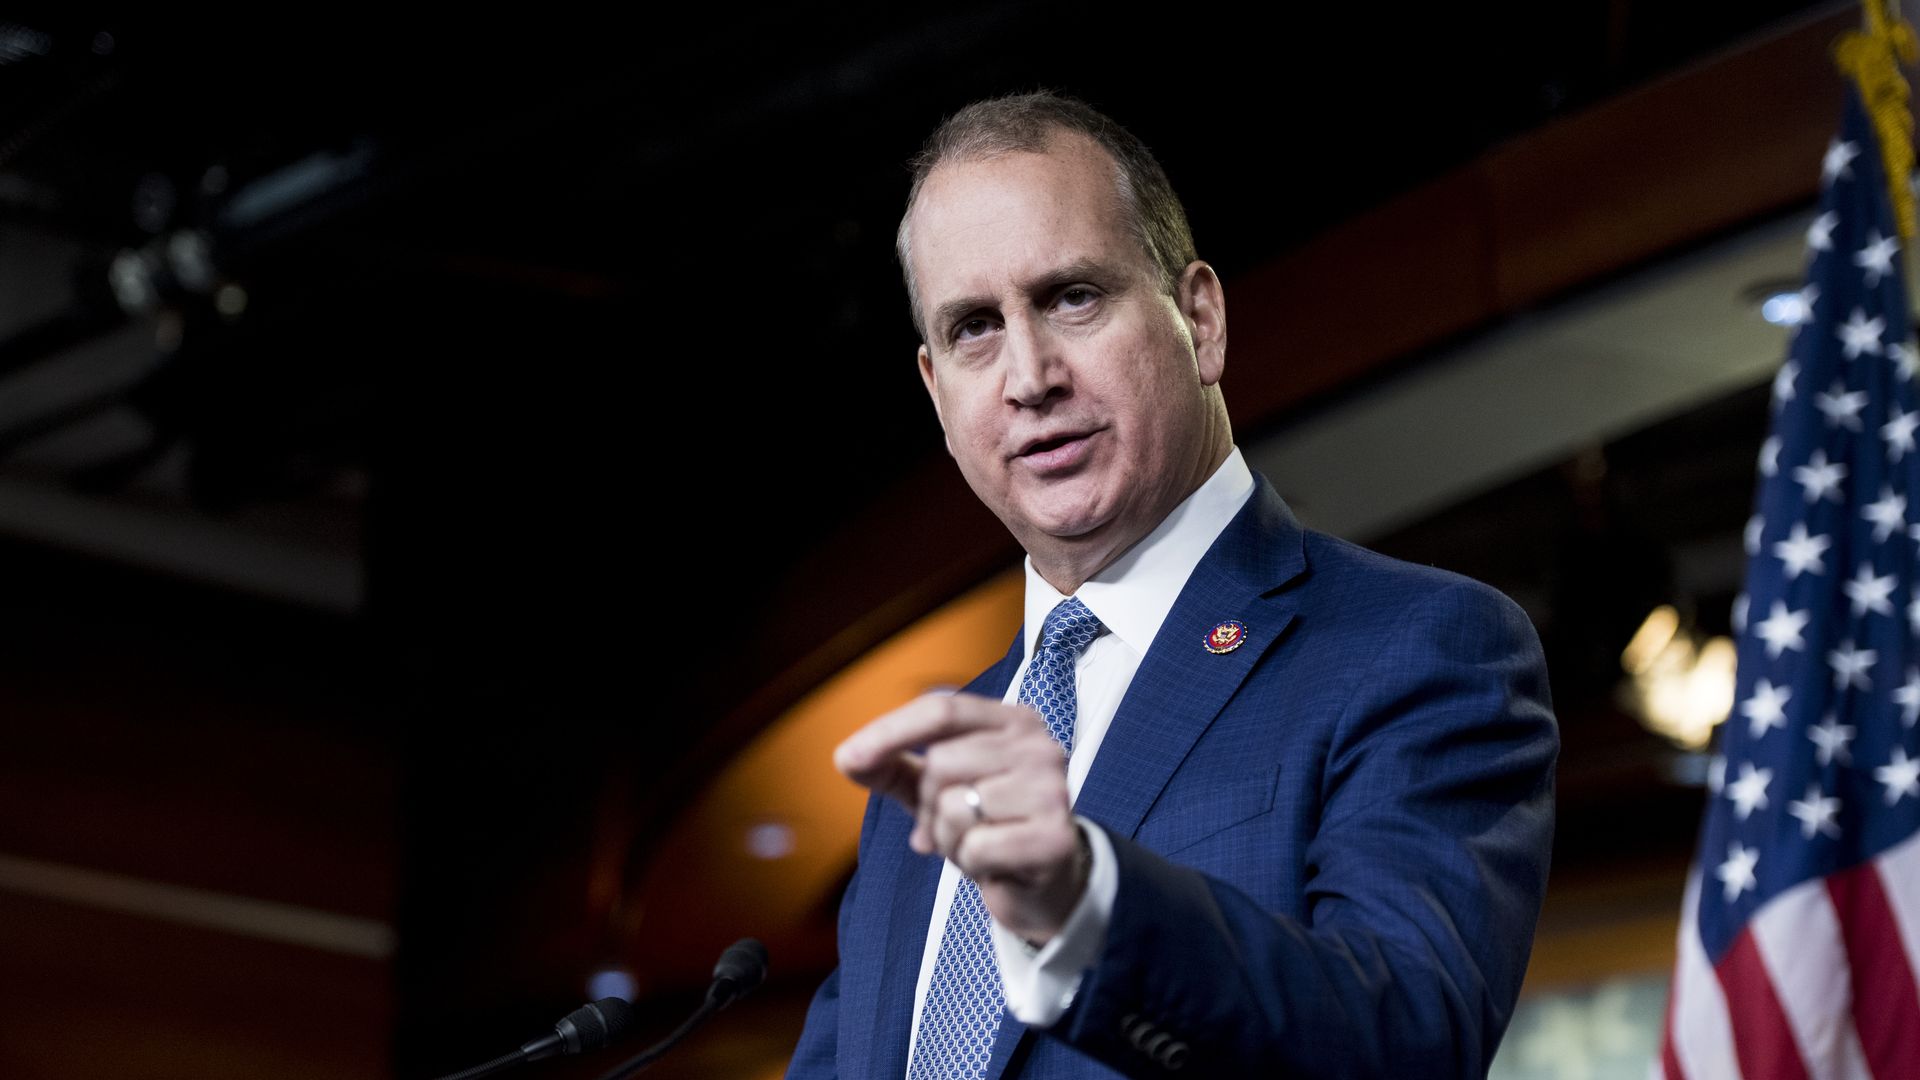 Rep. Mario Diaz-Balart, R-Fla., speaks about Cuba during the House Republicans weekly news conference on Wednesday, Feb. 26, 2020